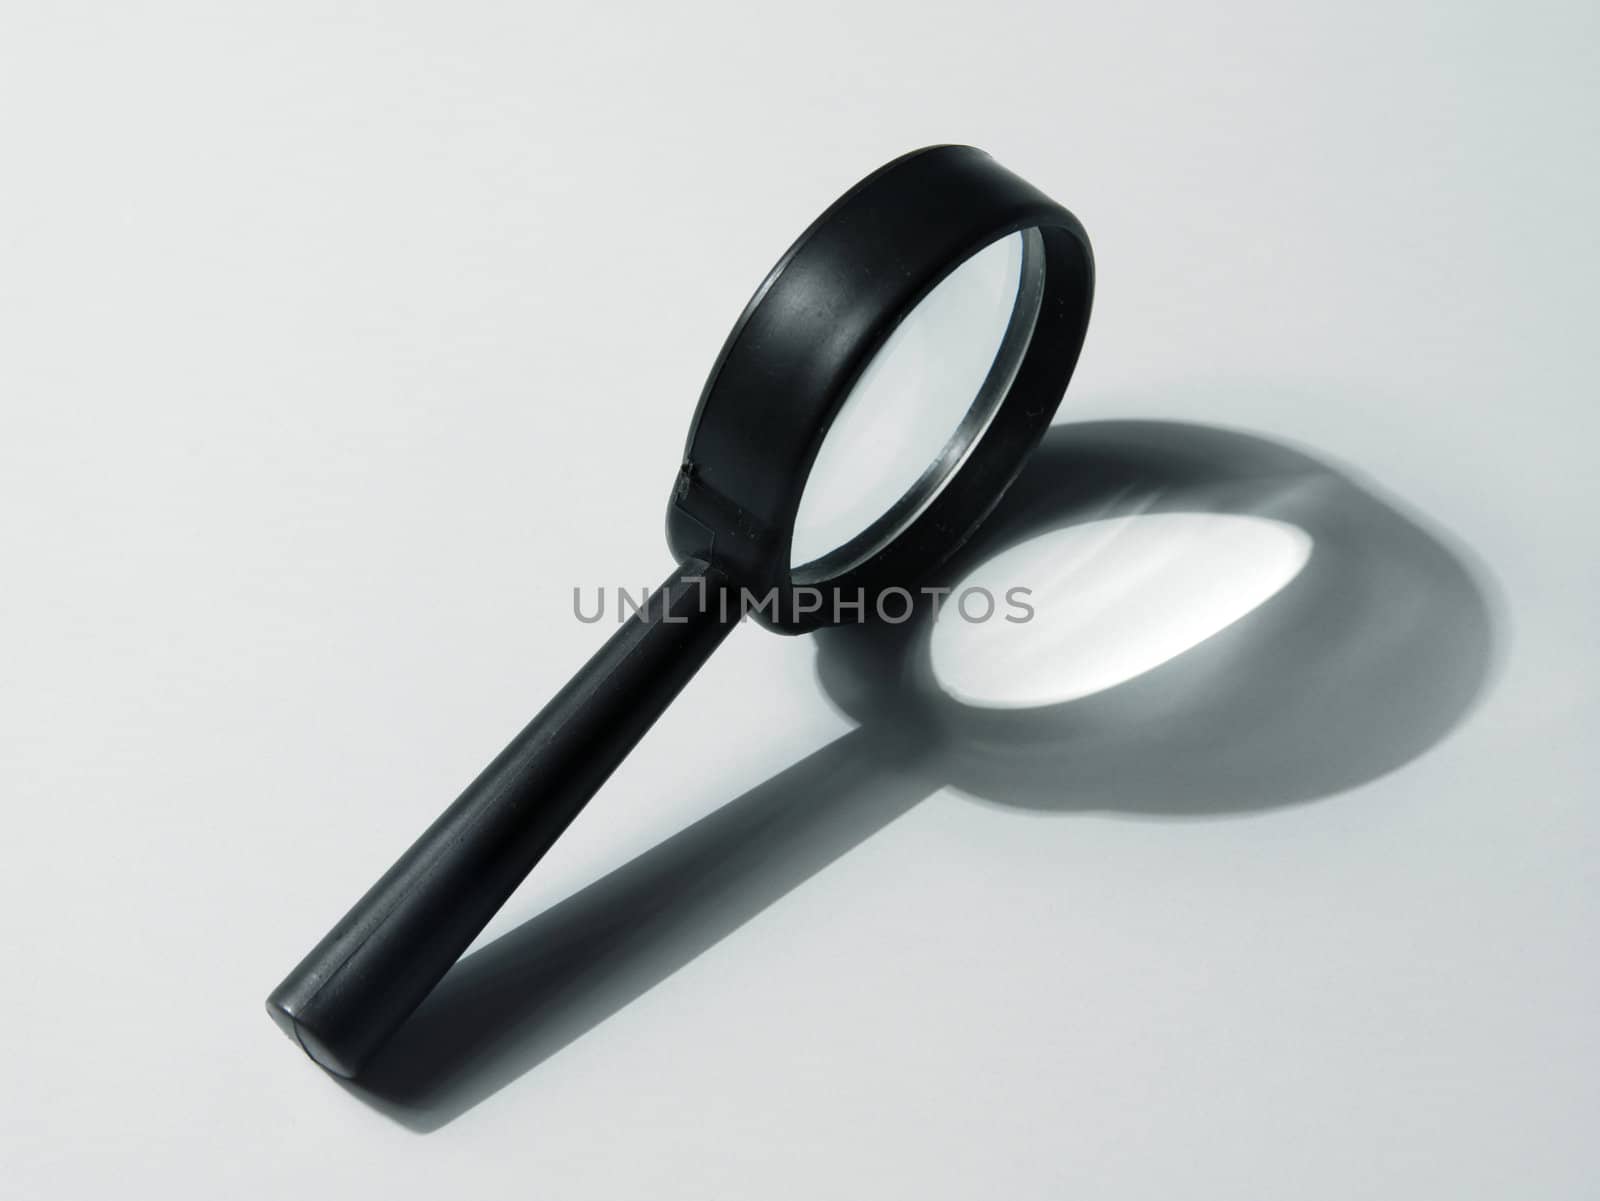  close up of the magnifying glass on the plain background